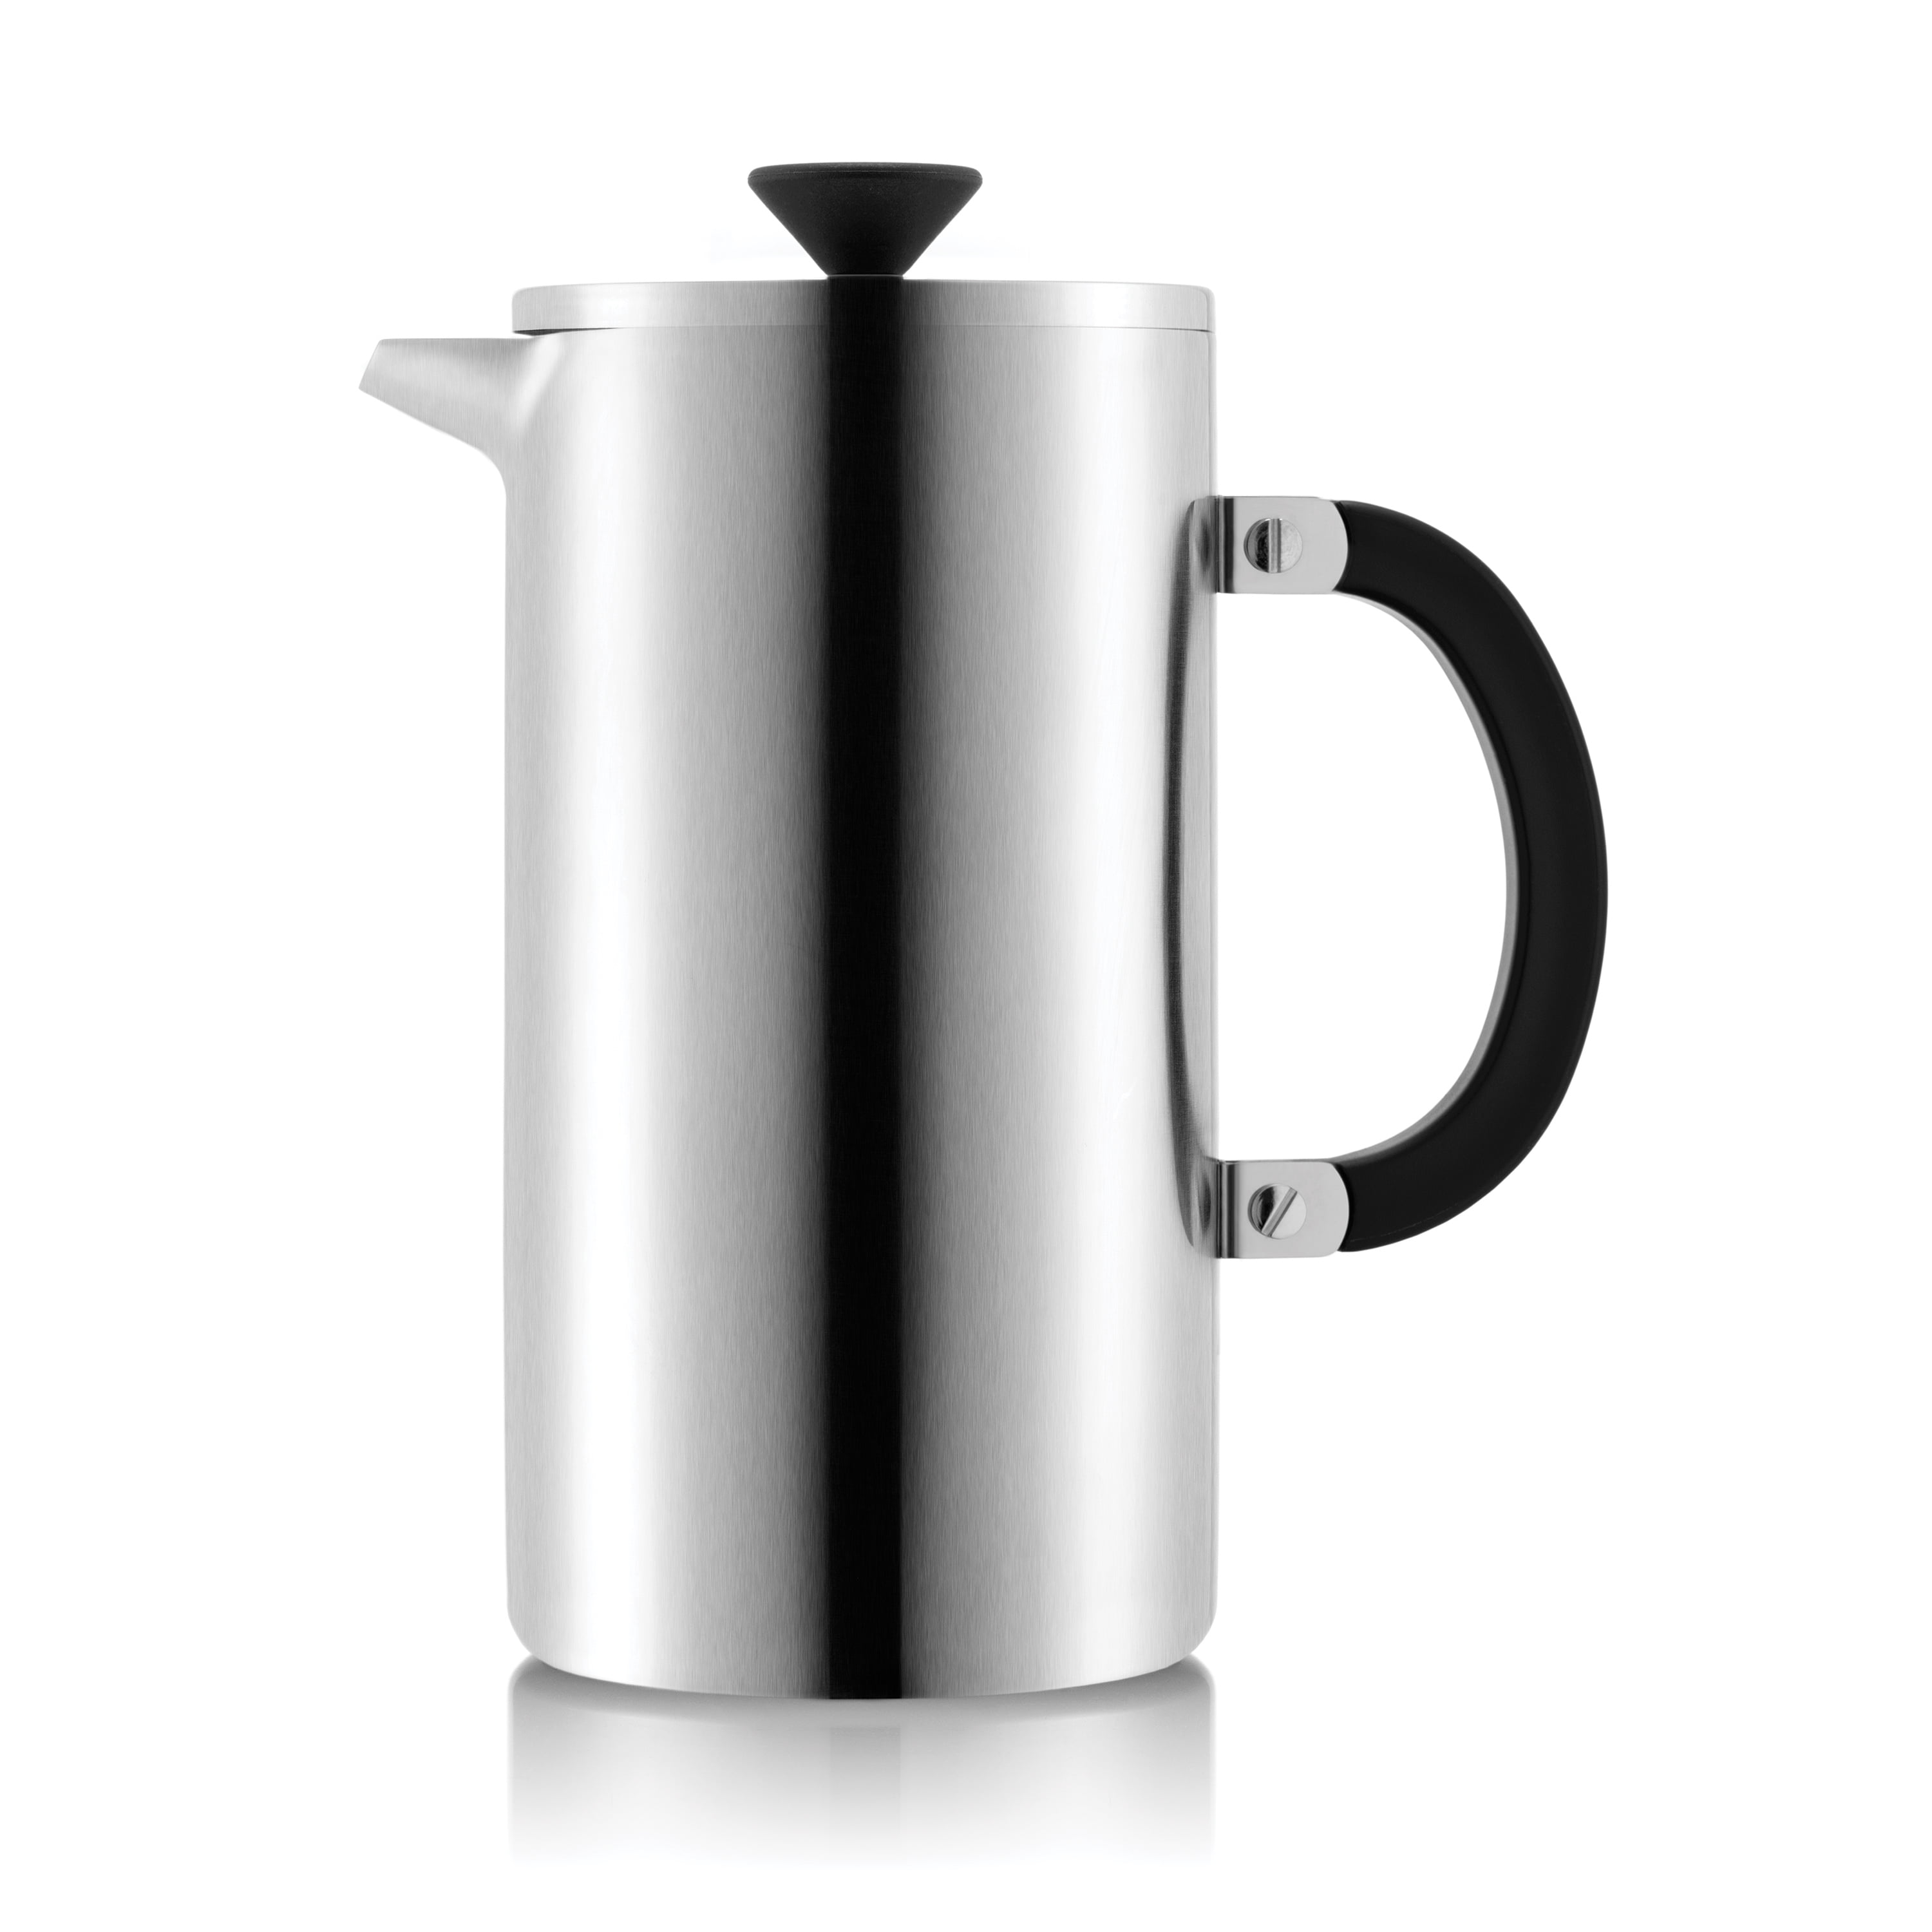 BODUM Tribute Double Wall French Press Coffee Maker, 34 Ounce, Stainless Steel